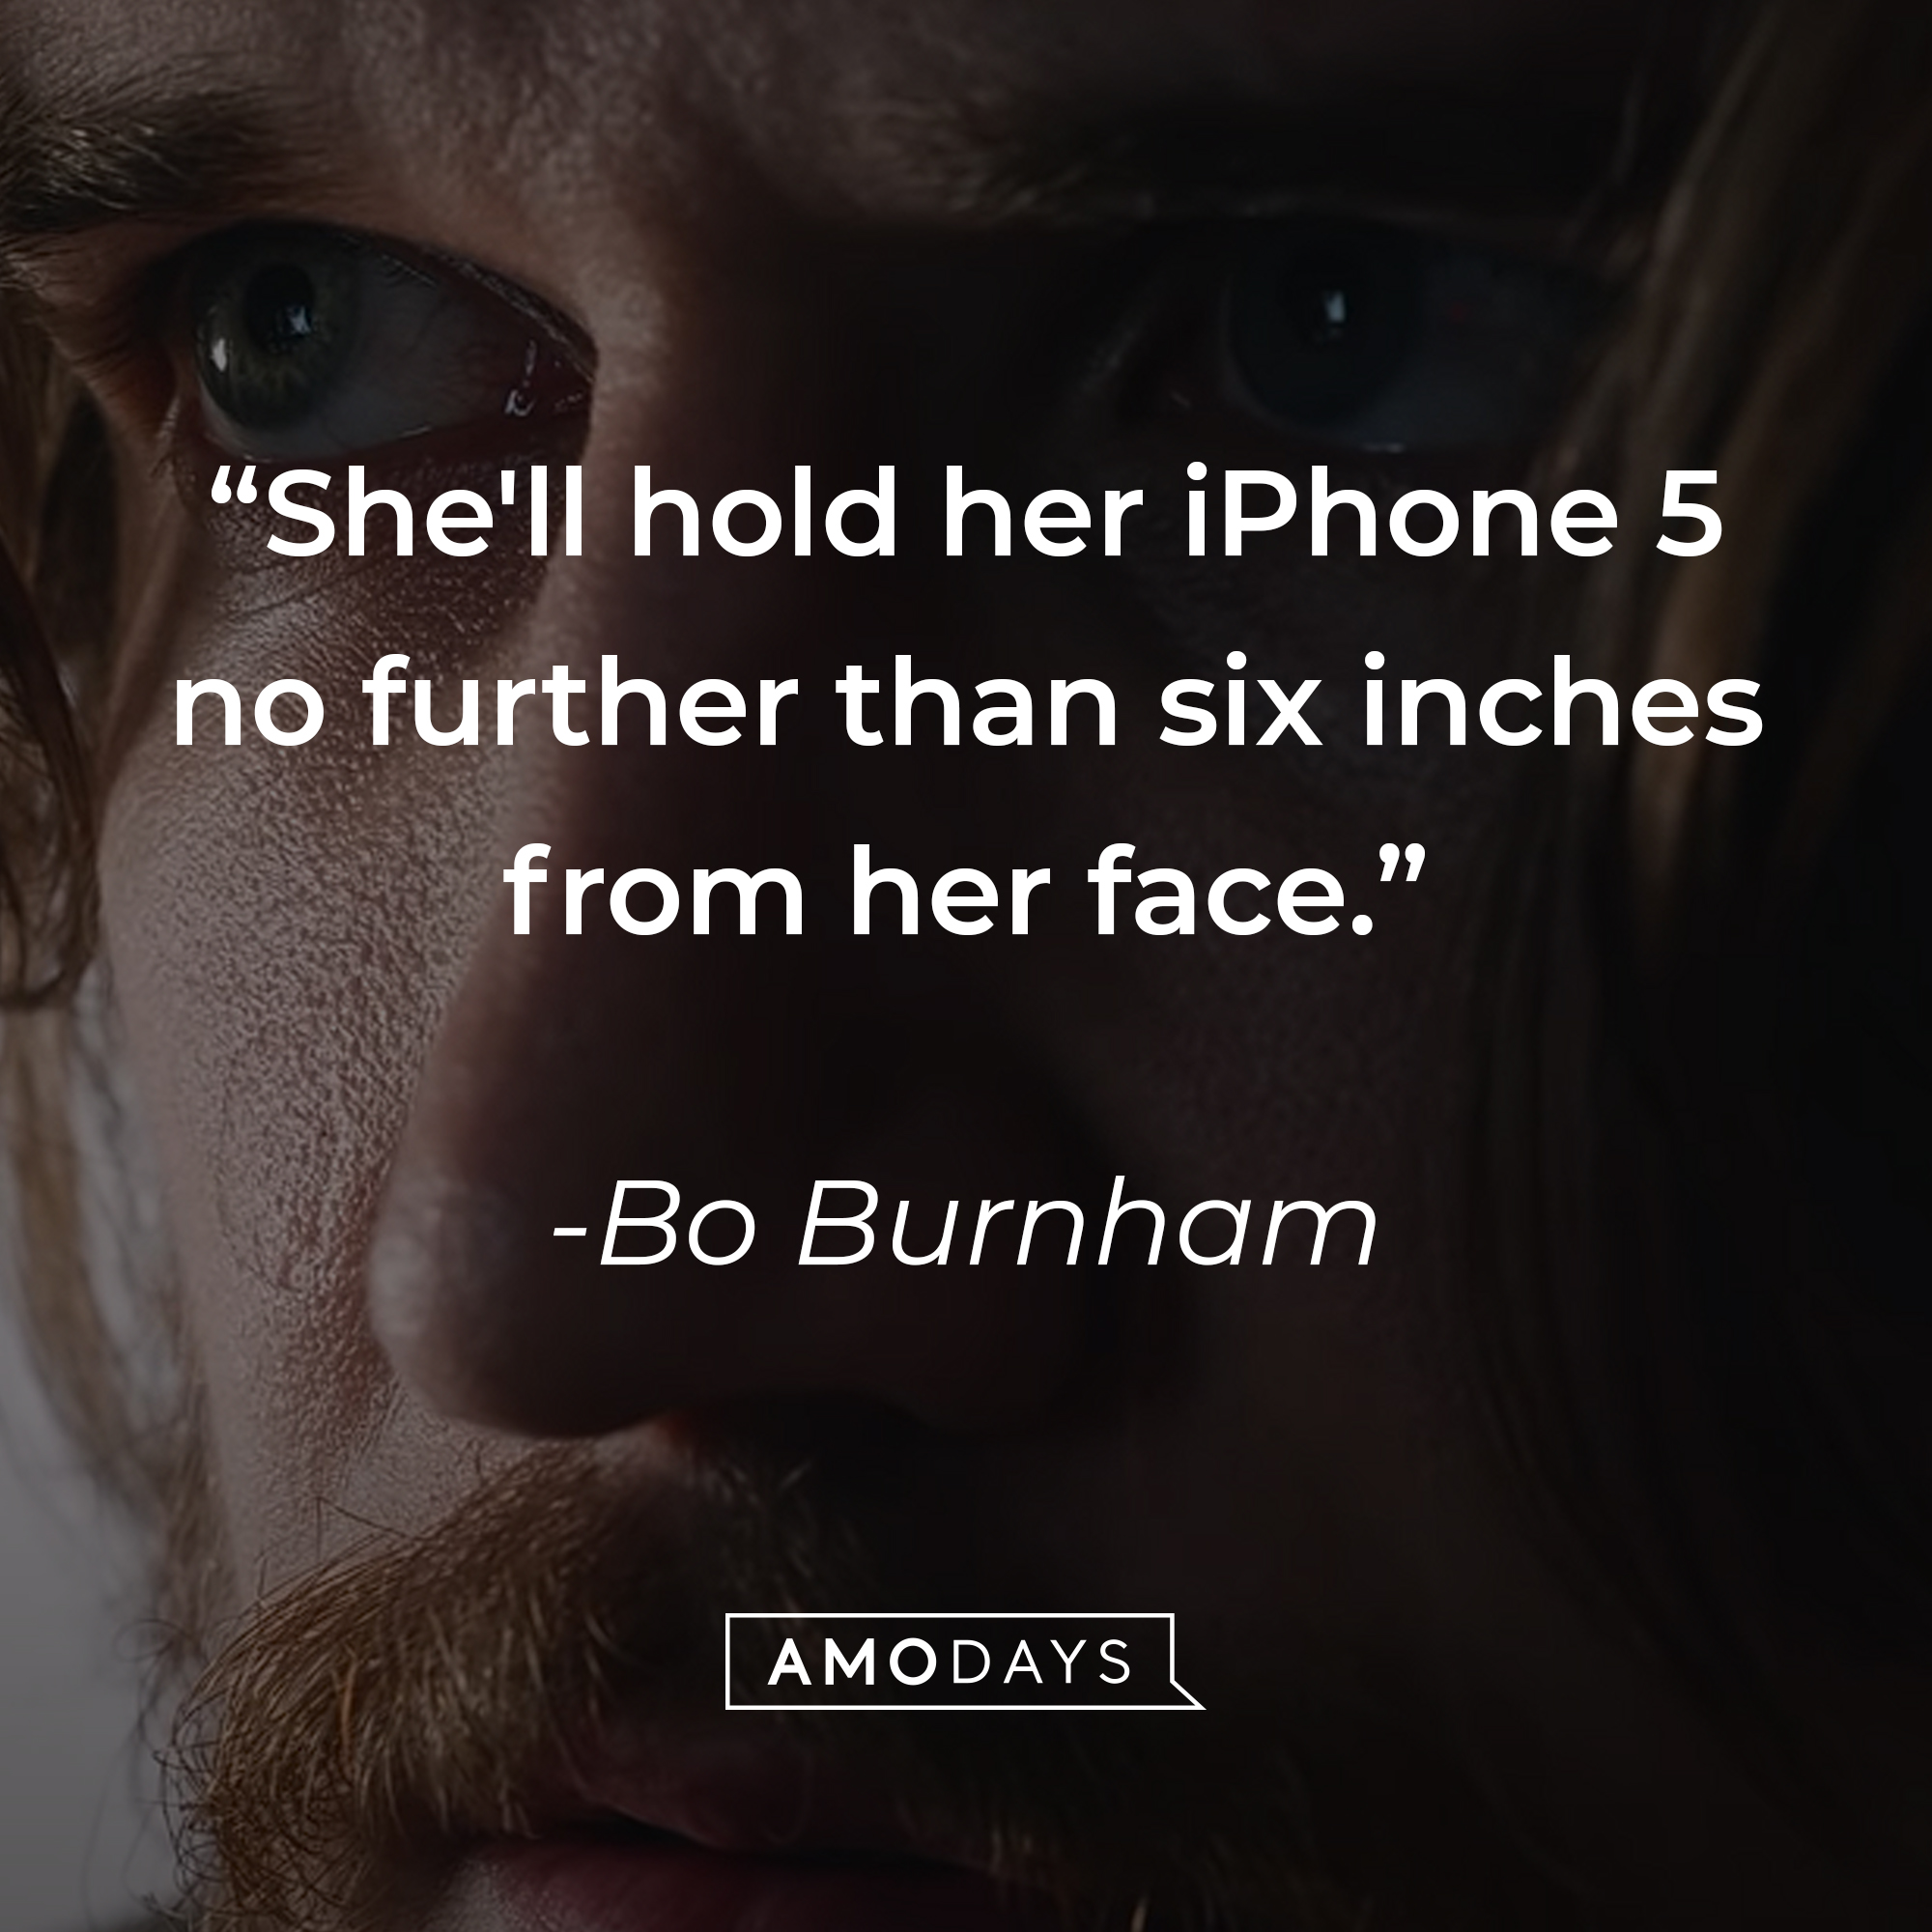 Bo Burnham's quote: "She'll hold her iPhone 5 no further than six inches from her face." | Source: youtube.com/boburnham